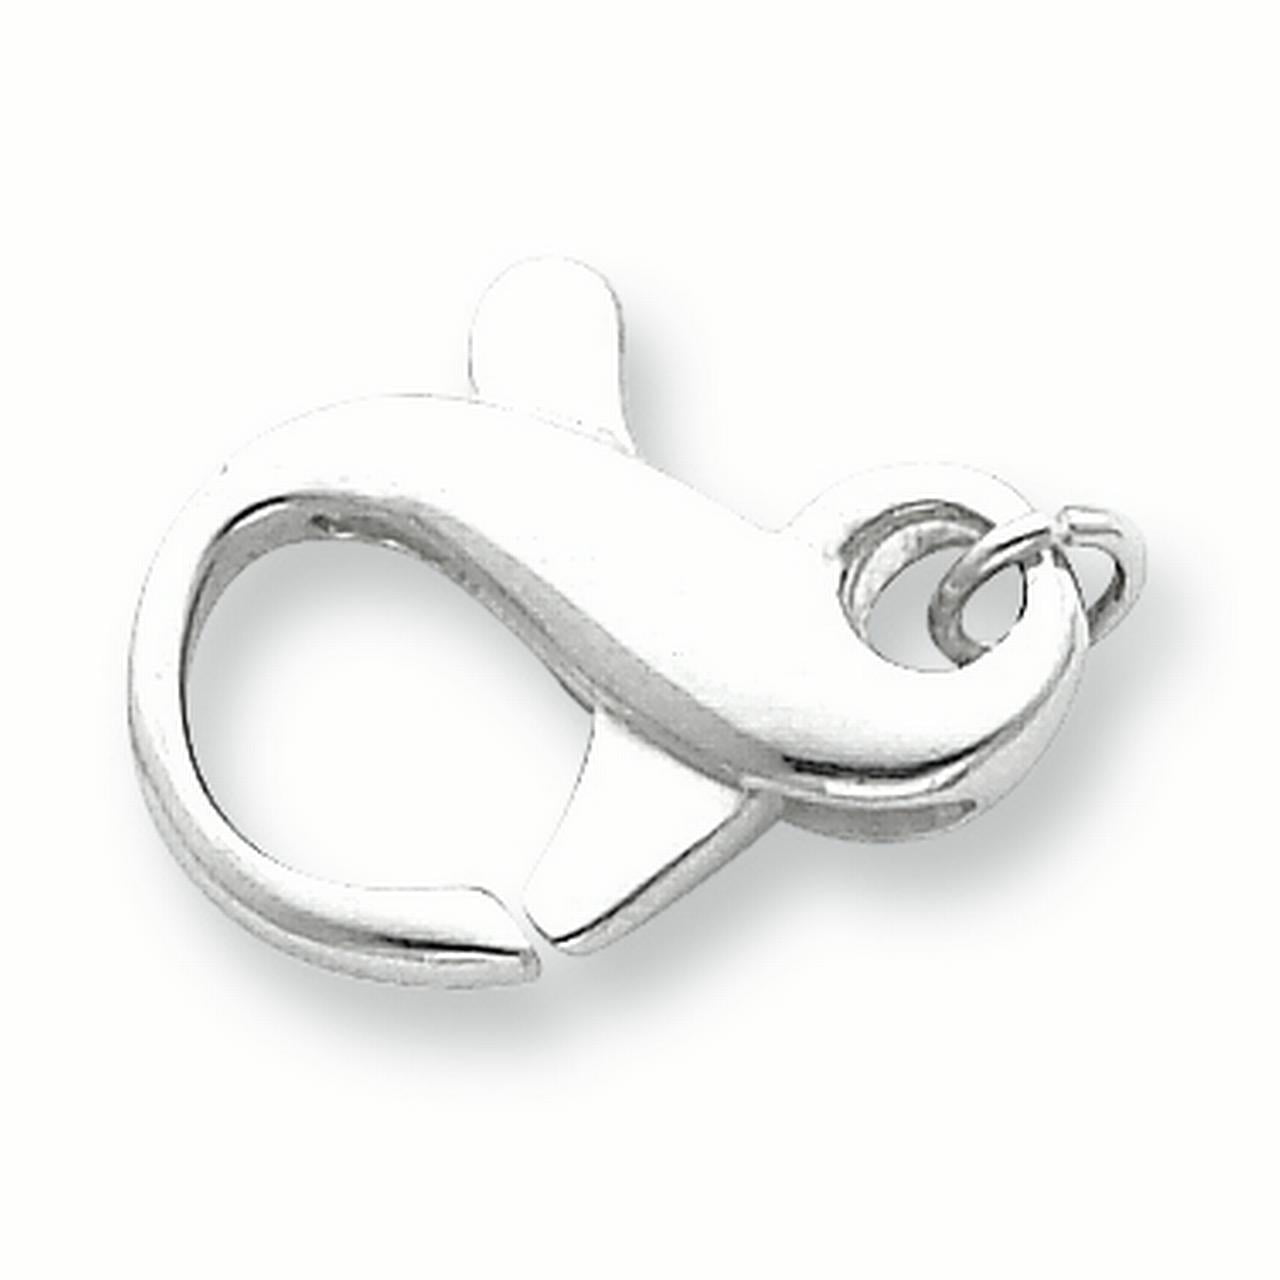 Silvertoned lobster clasp, 15 mm - The Queen Ring